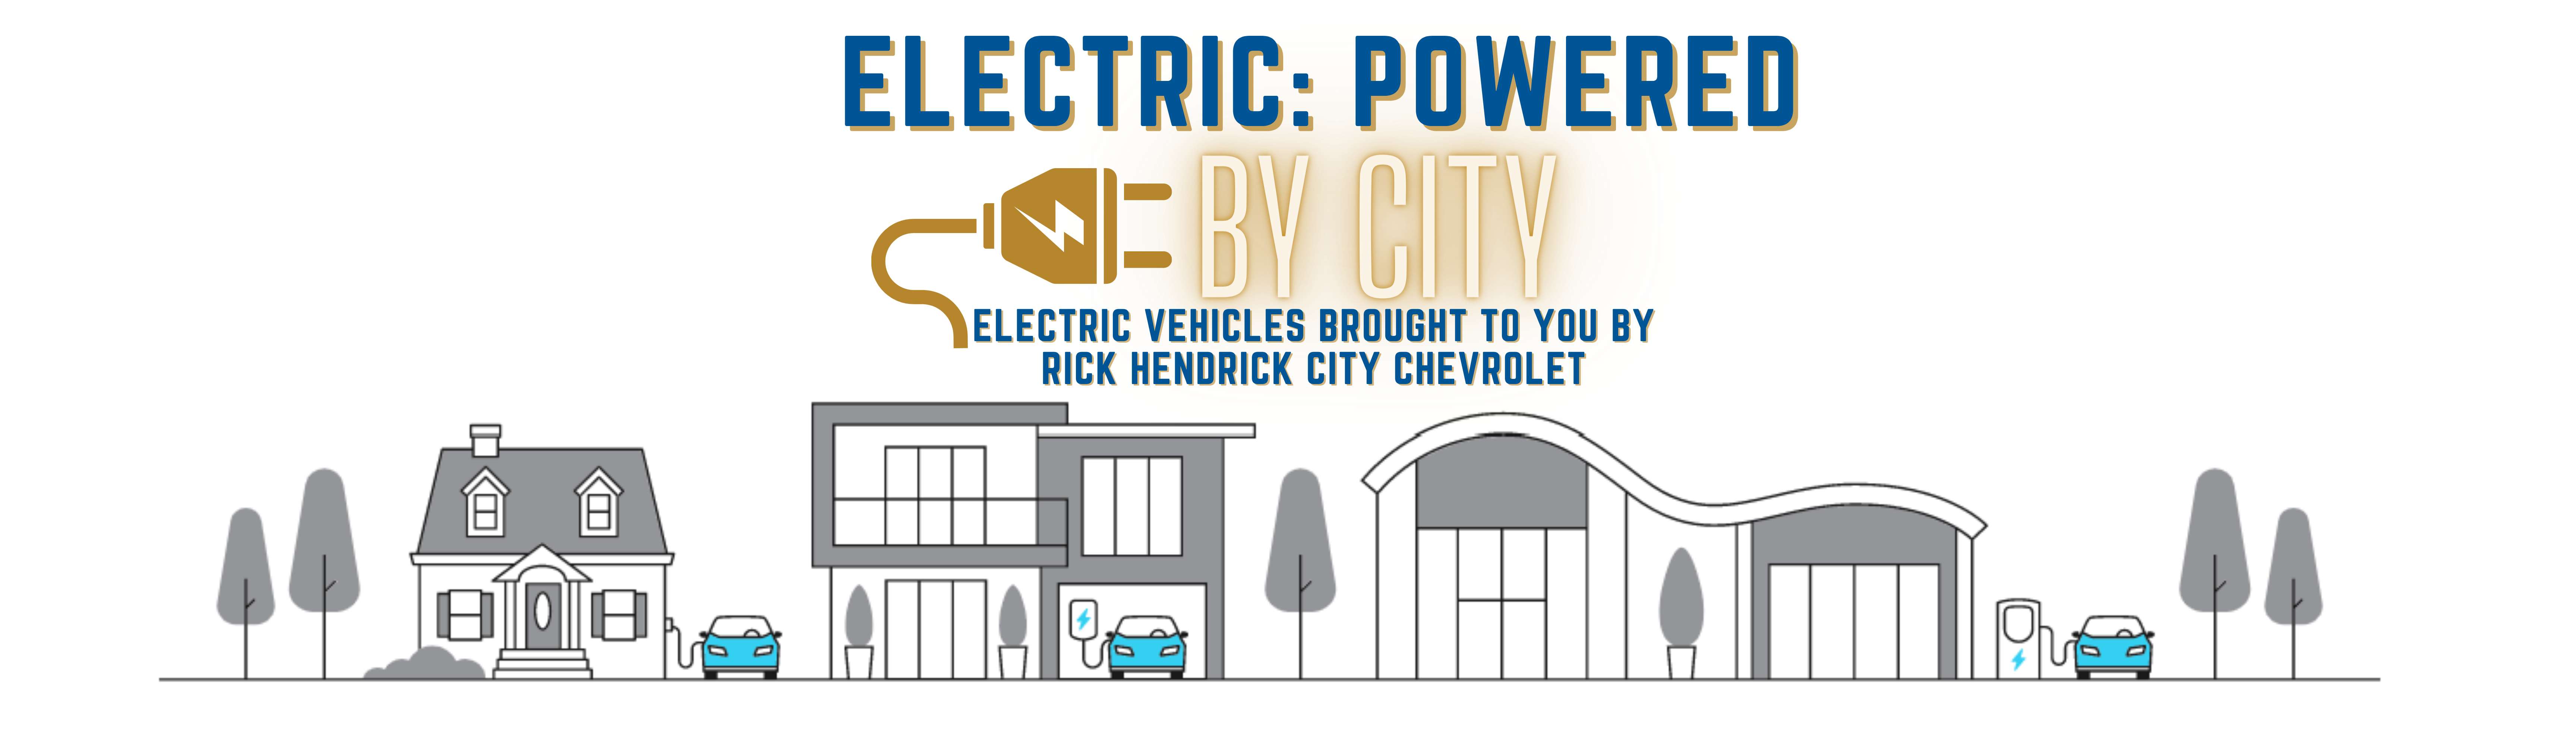 Electric Powered by City; Electric vehicles brought to you by City Chevrolet.